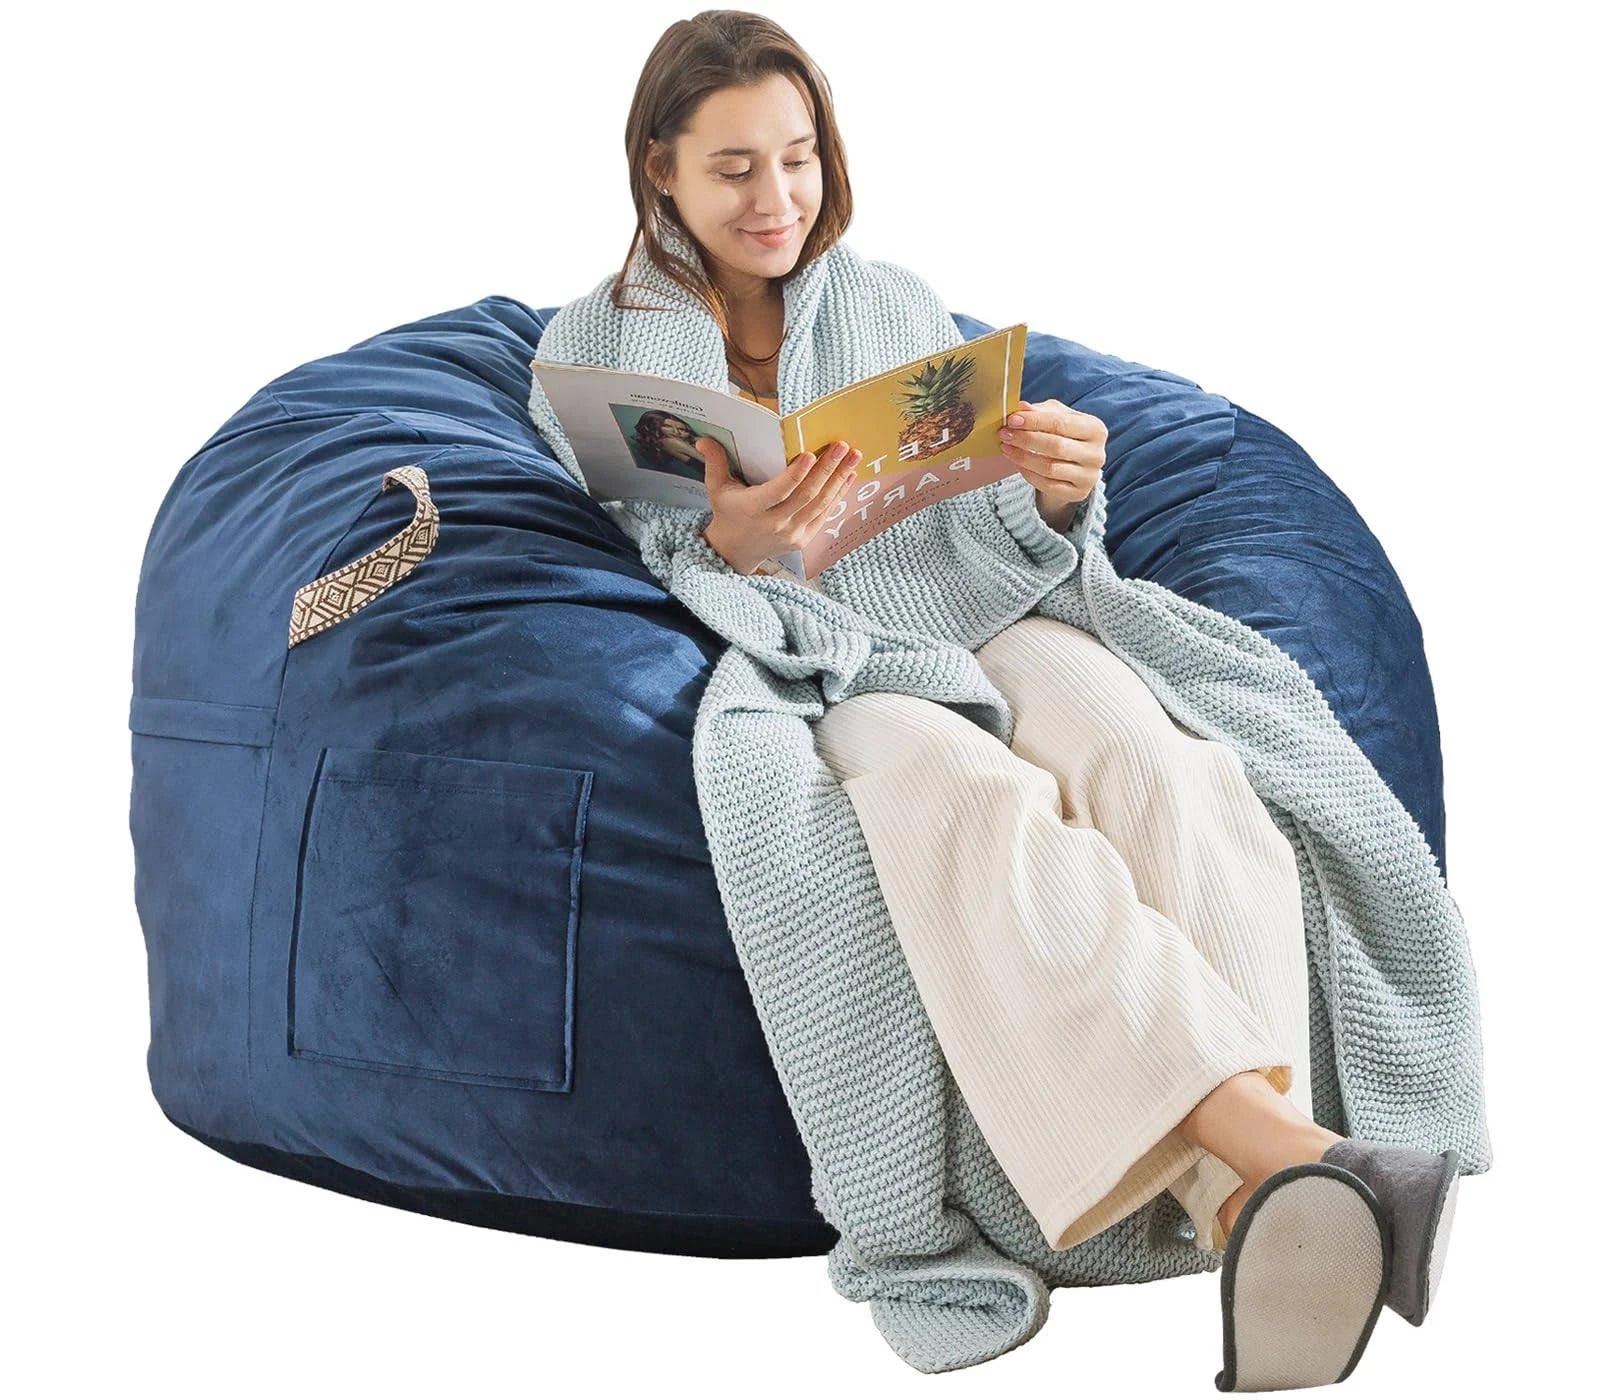 Comfortable 4ft Bean Bag Chair for Adults | Image